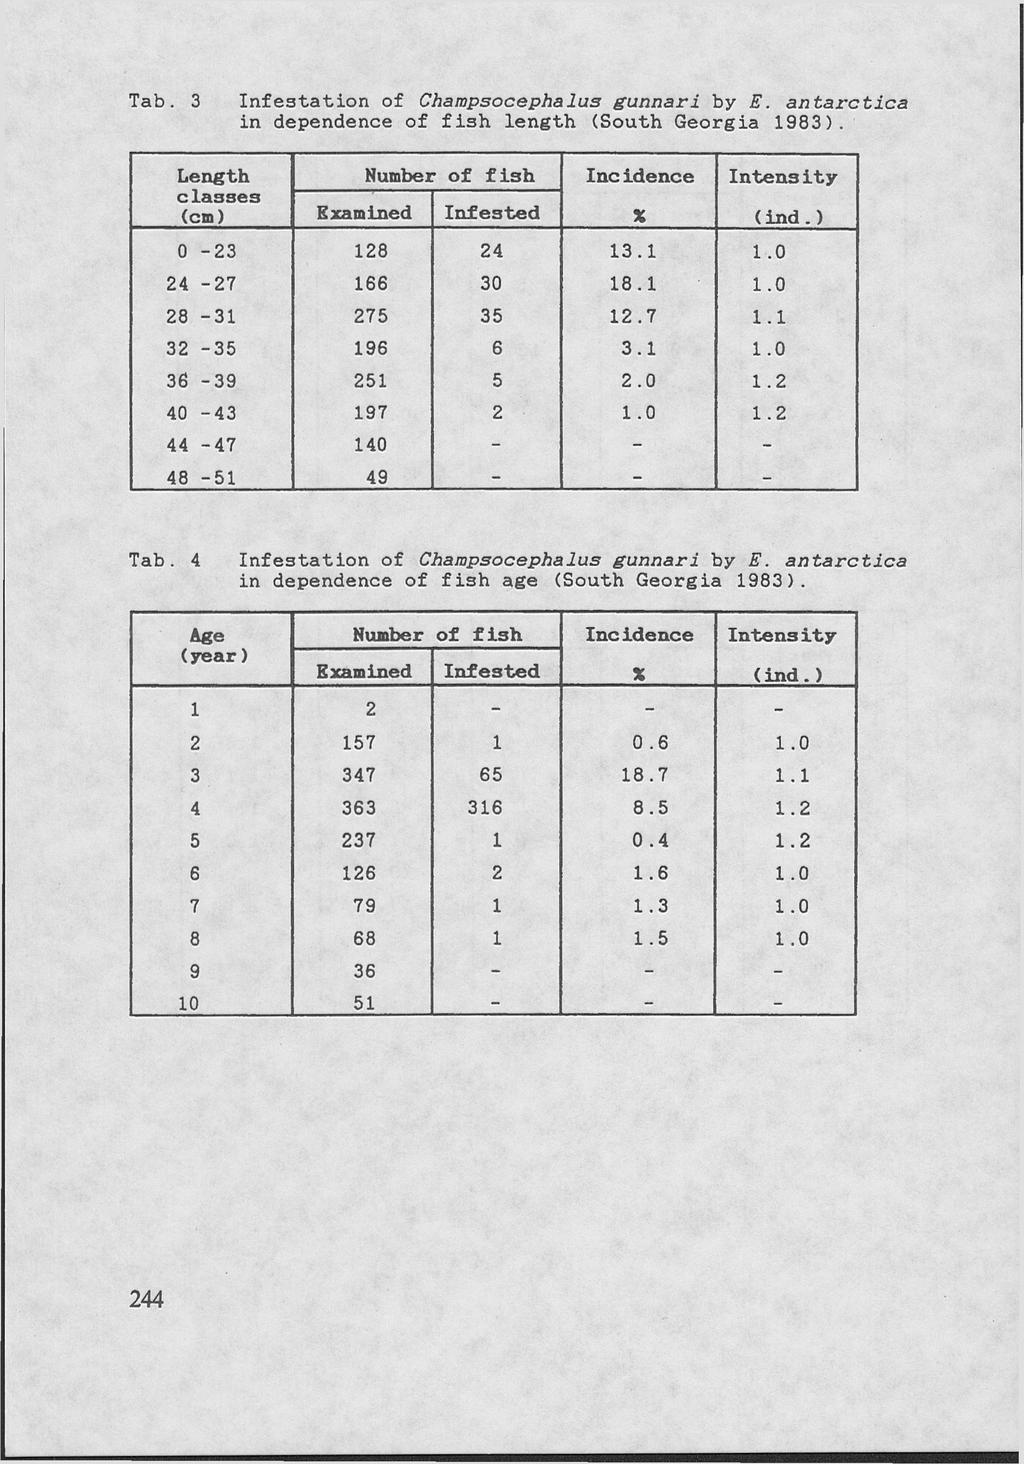 Tab. in dependence of fish length (South Georgia 198). Length Number of fish Inc idence Intens ity classes (cm) Examined Infested X (ind.) 0-23 128 24 13.1 1.0 24-27 166 30 18.1 1.0 28-31 275 35 12.